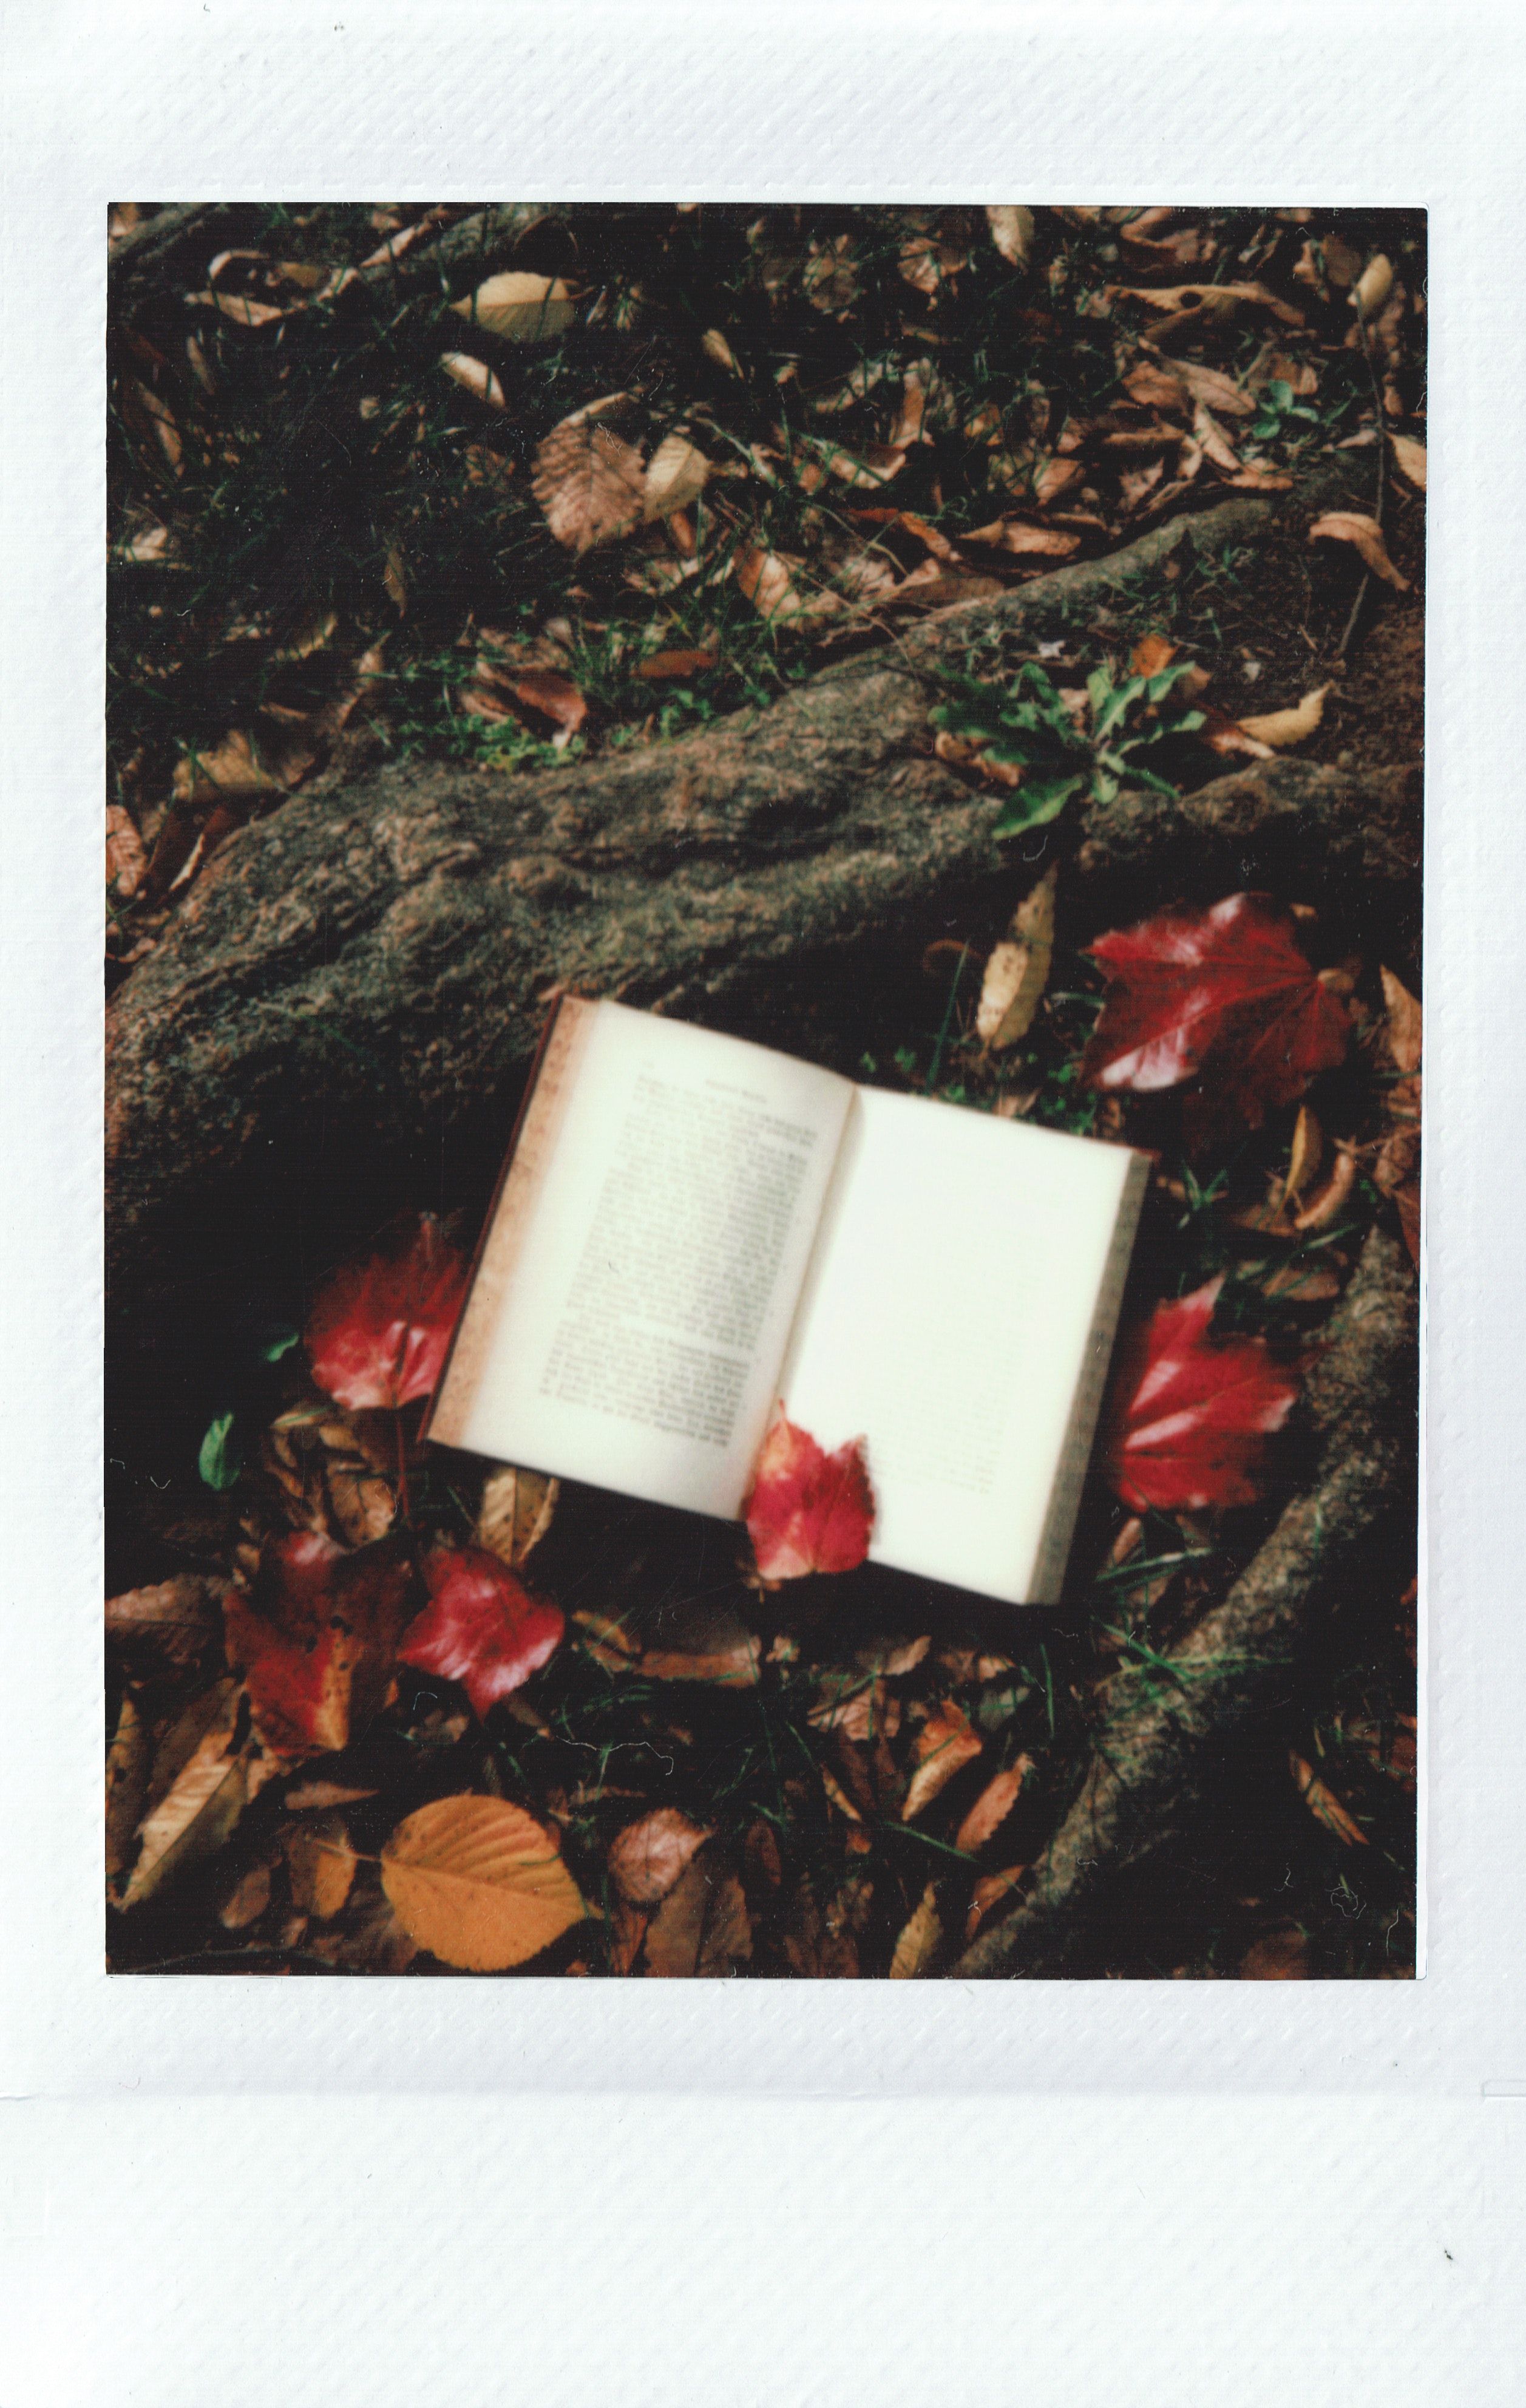 A book lies open on the ground in a pile of leaves. - Polaroid